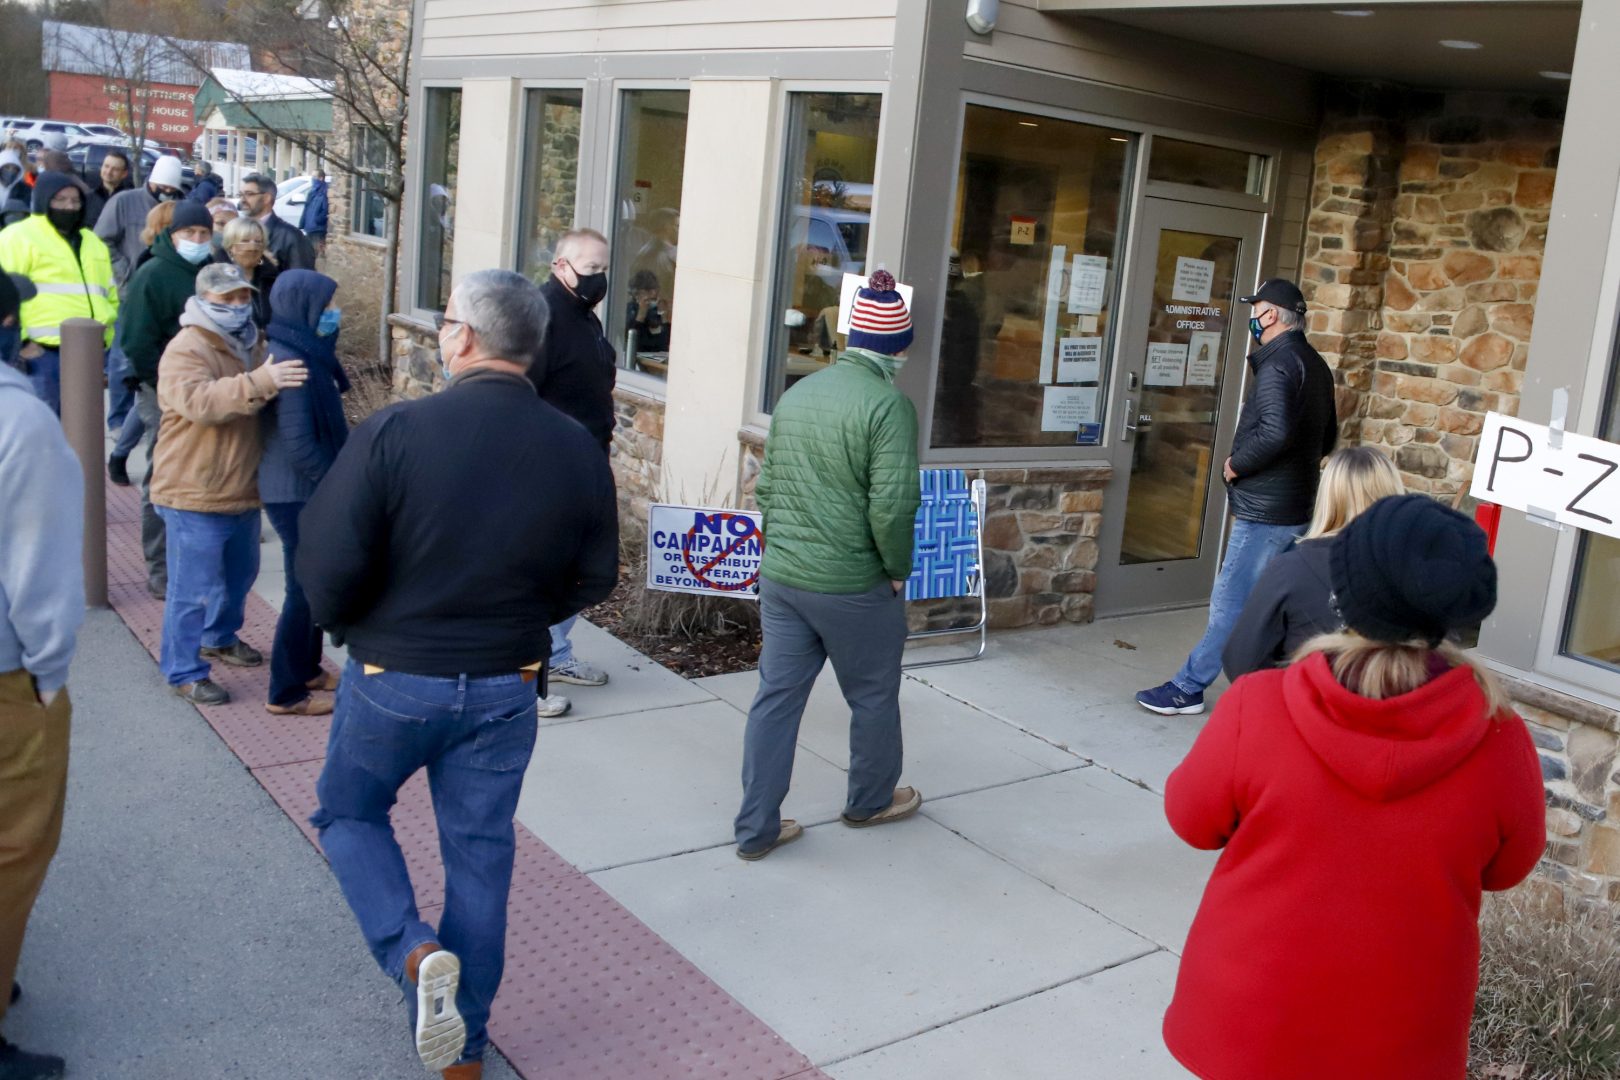 People lined up at the Jackson Township Municipal Building, start to enter the poll as it opens, Tuesday, Nov. 3, 2020, Election Day, in Jackson Township, Pa.  